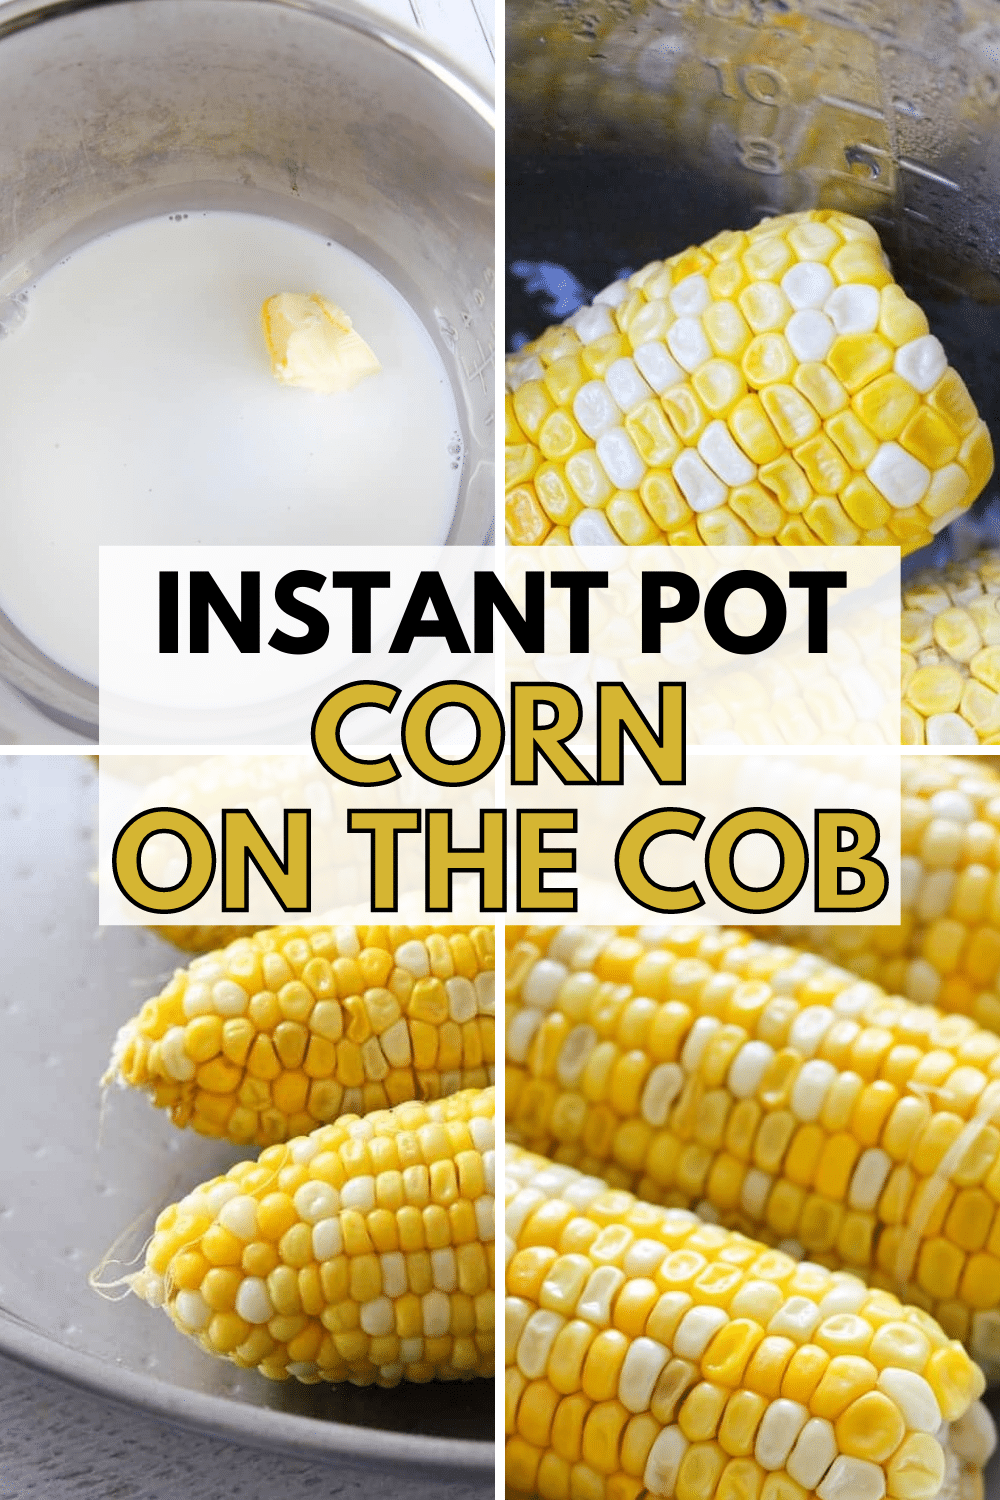 This Instant Pot Corn on the Cob is so much tastier than ordinary corn on the cob. You have to try this super easy recipe! #instantpot #pressurecooker #cornonthecob via @wondermomwannab